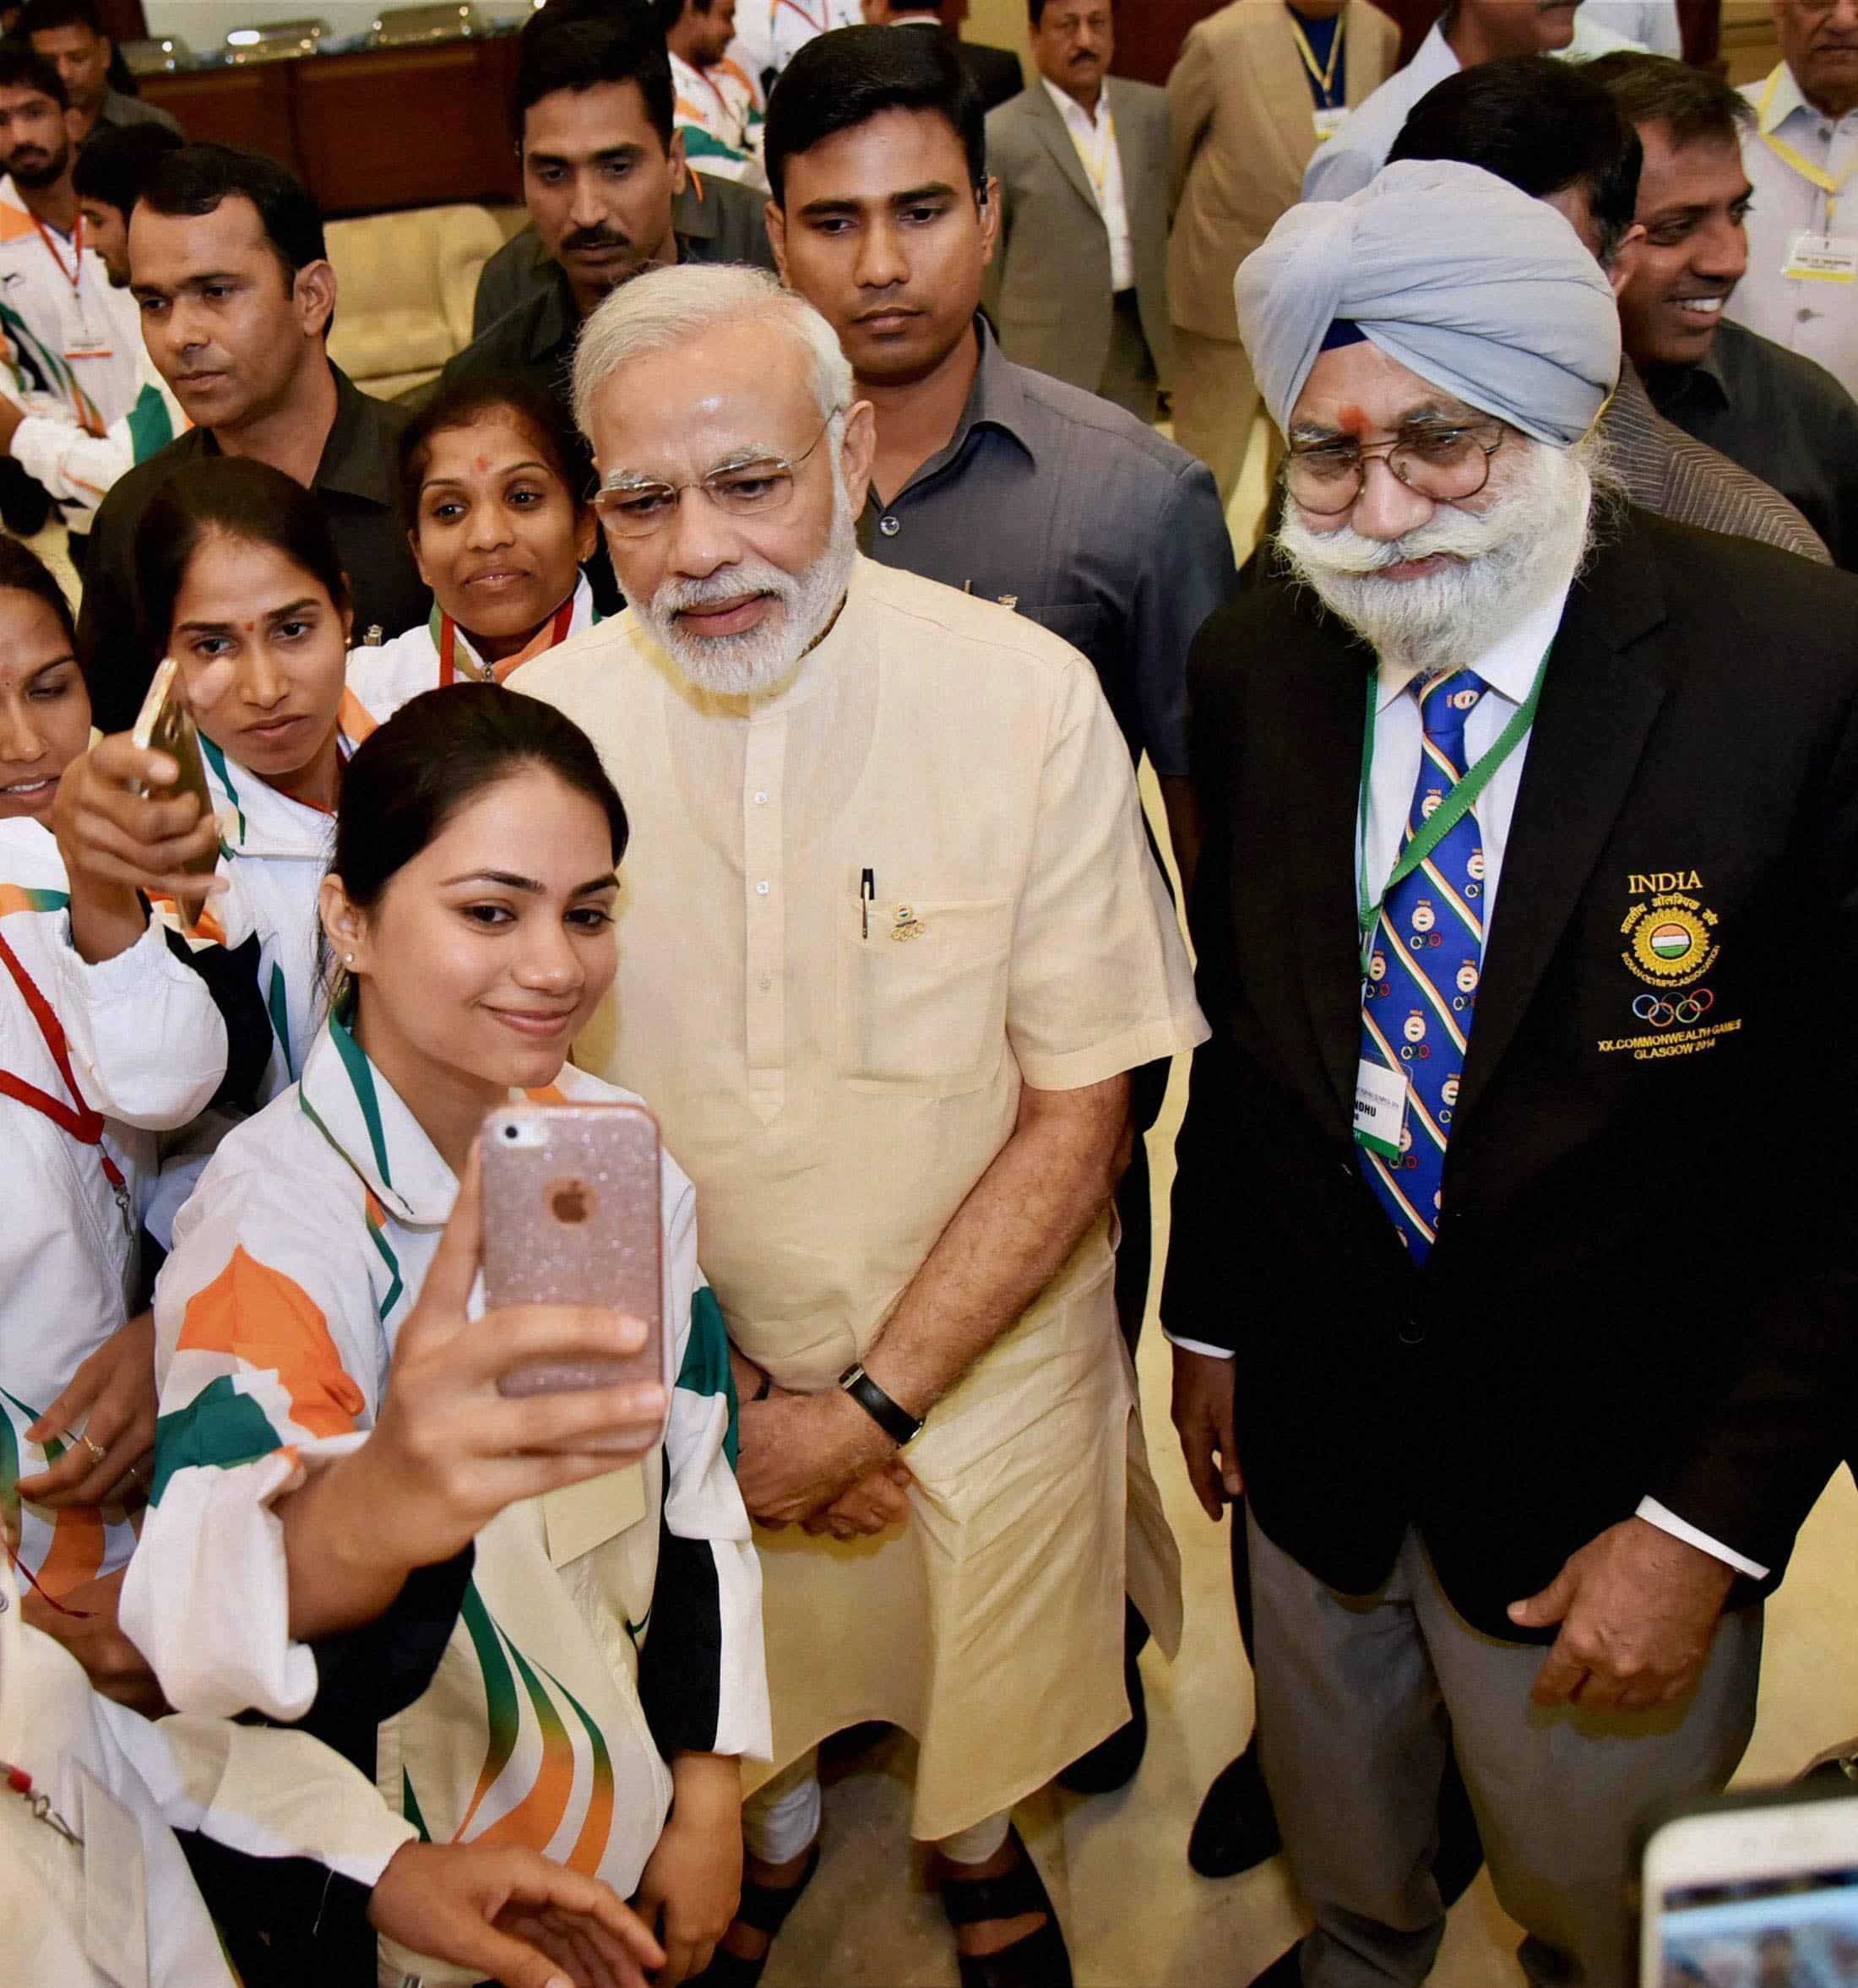 The Indian contingent for Rio Olympics 2016 and PM Narendra Modi in a selfie moment. PTI